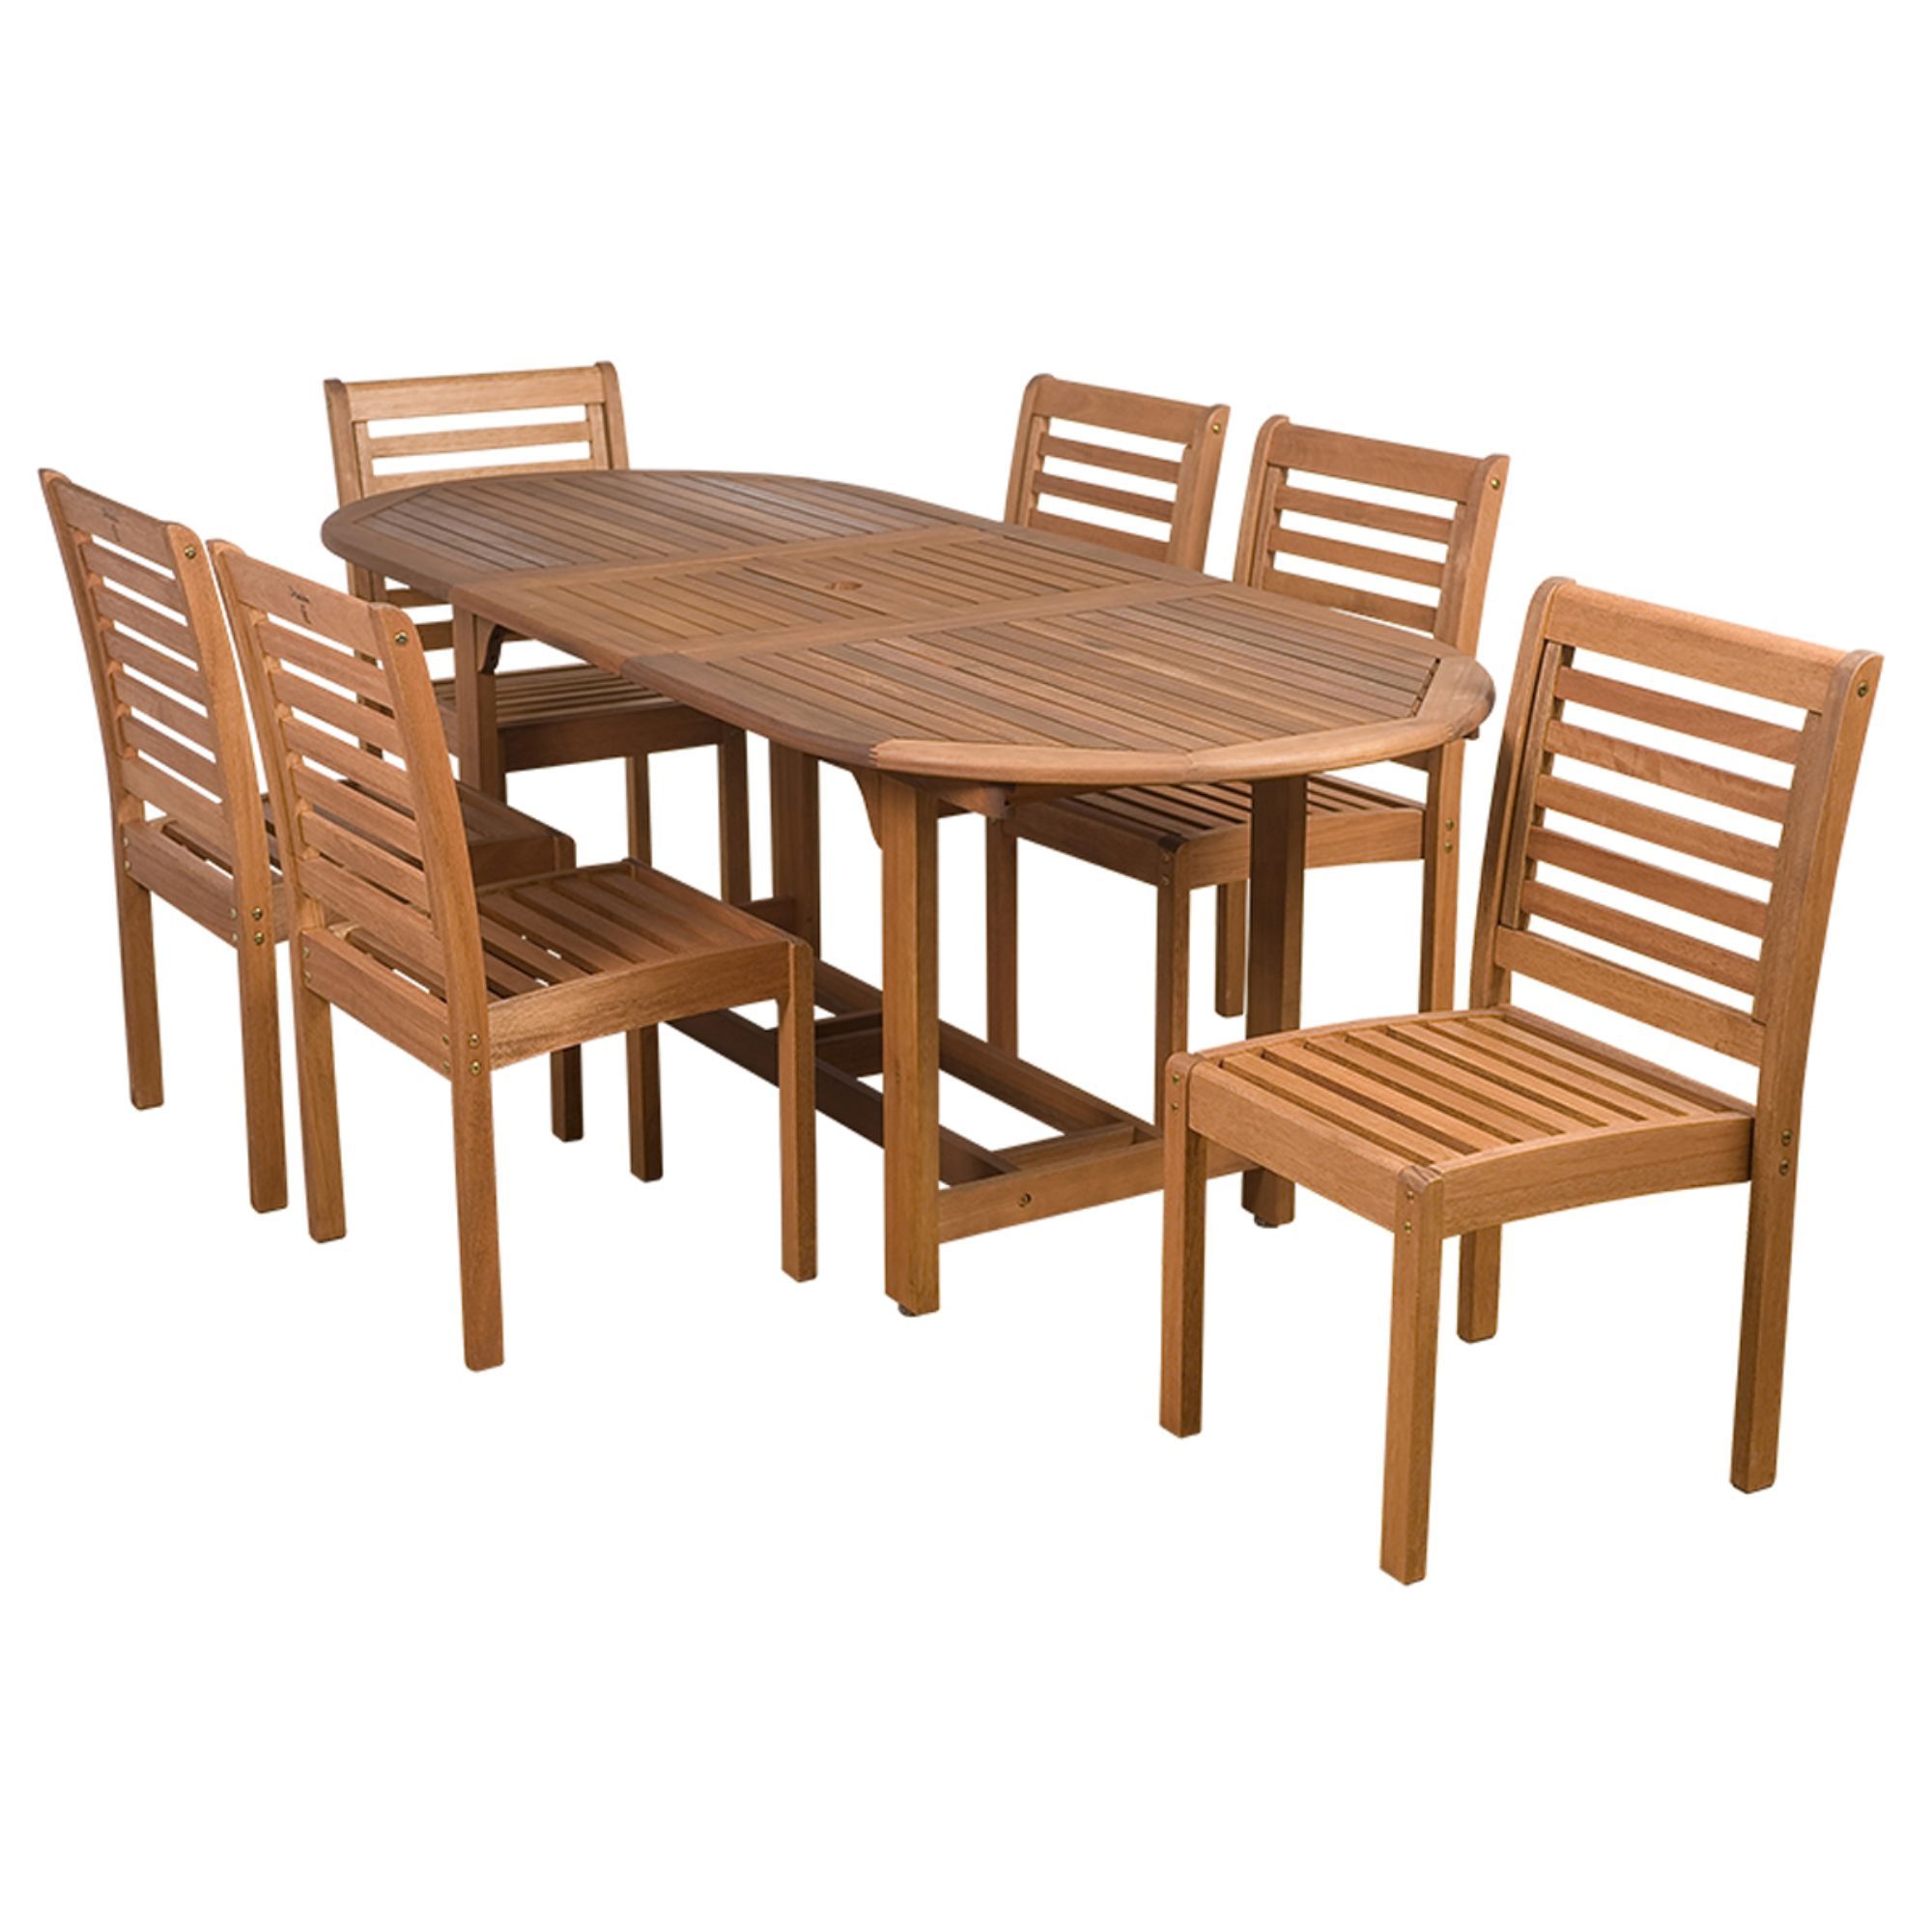 7 Piece Brown Eucalyptus Armless Oval Extendable Patio Dining Set 35 Pertaining To 7 Piece Outdoor Oval Dining Sets (View 15 of 15)